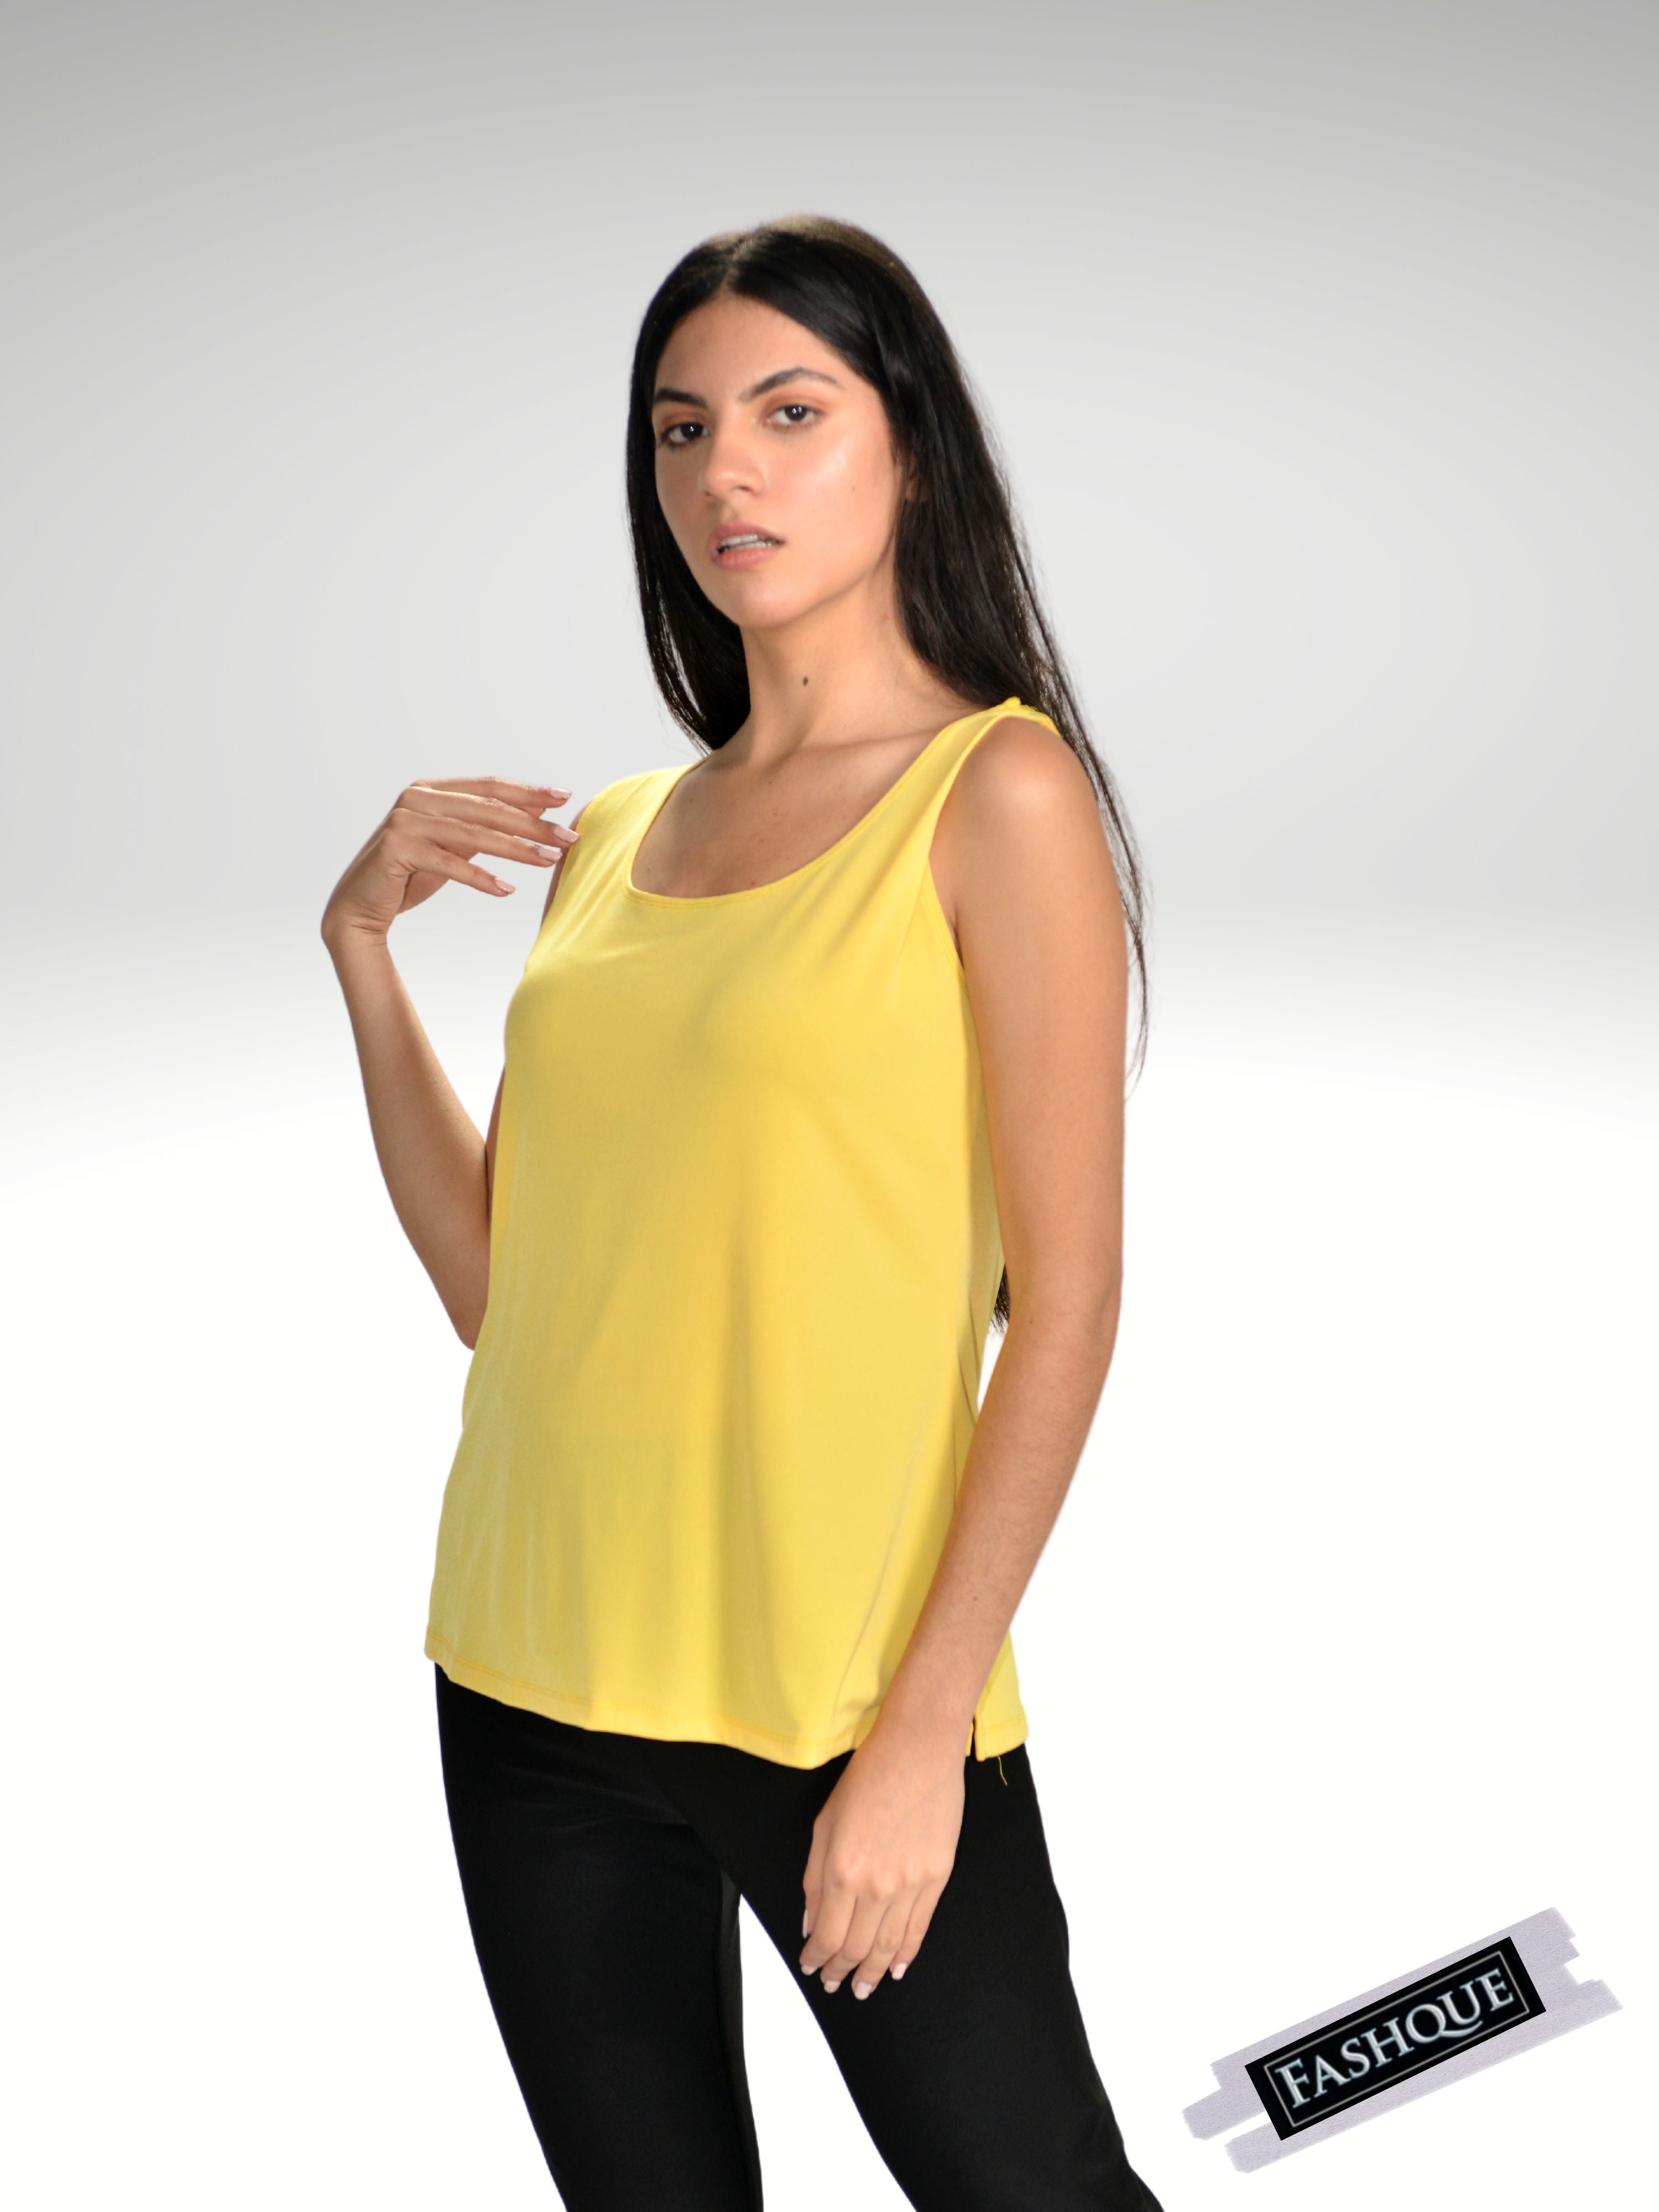 FASHQUE - Round Neck Basic Solid Tank Top - T318